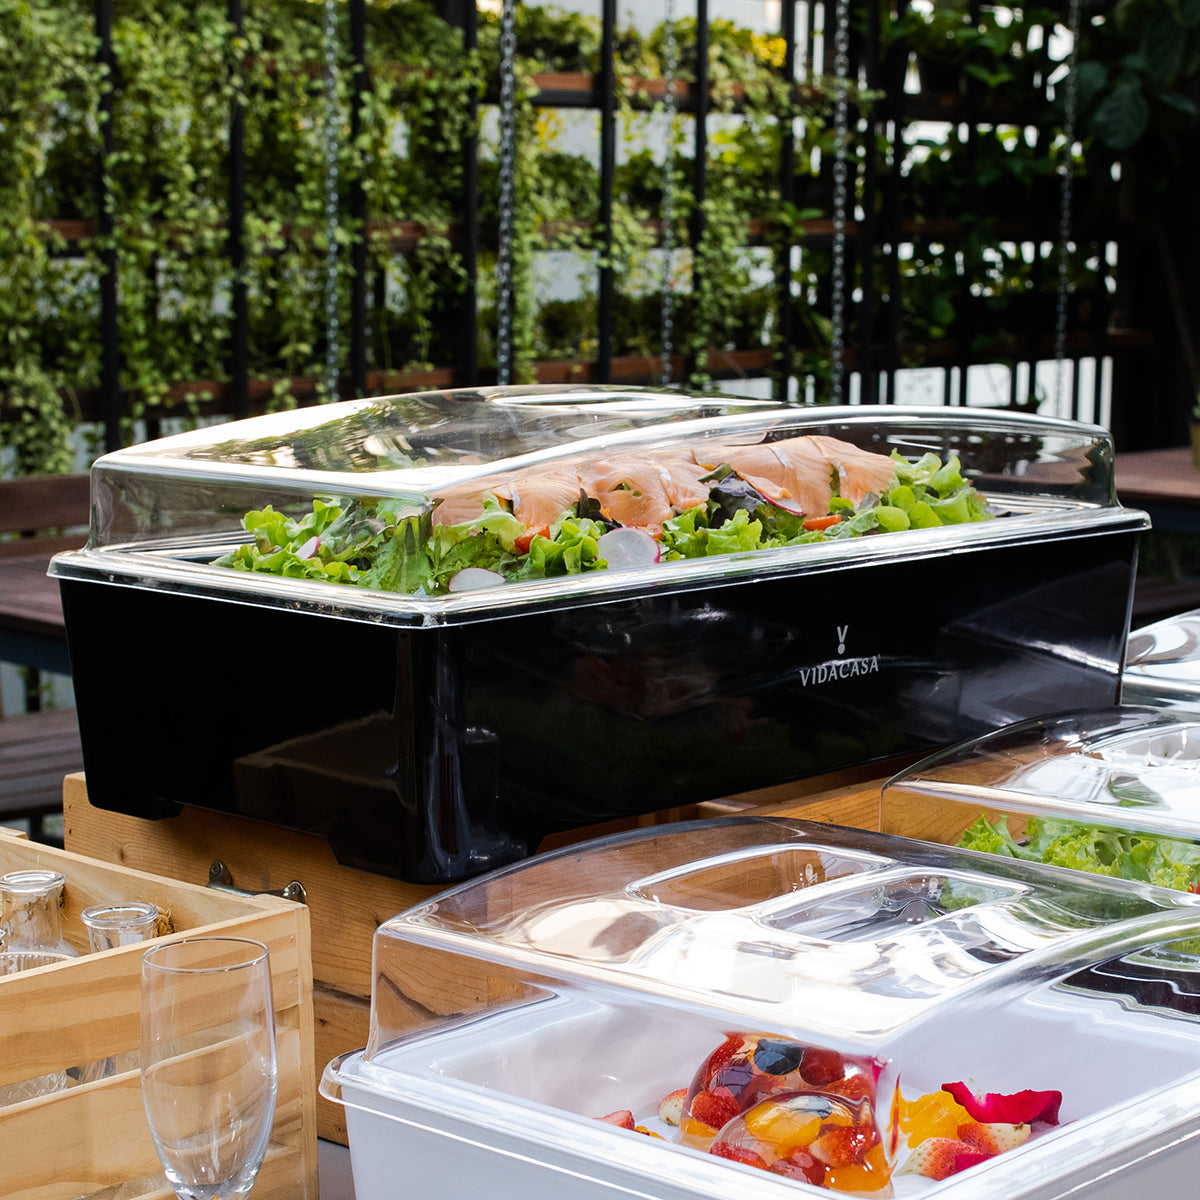 Food covers are essential for good temperature and hygiene control. Classic food covers are designed specifically made for Vidacasa® Classic buffetware equipment.  Made with lightweight ultra clear plastics.